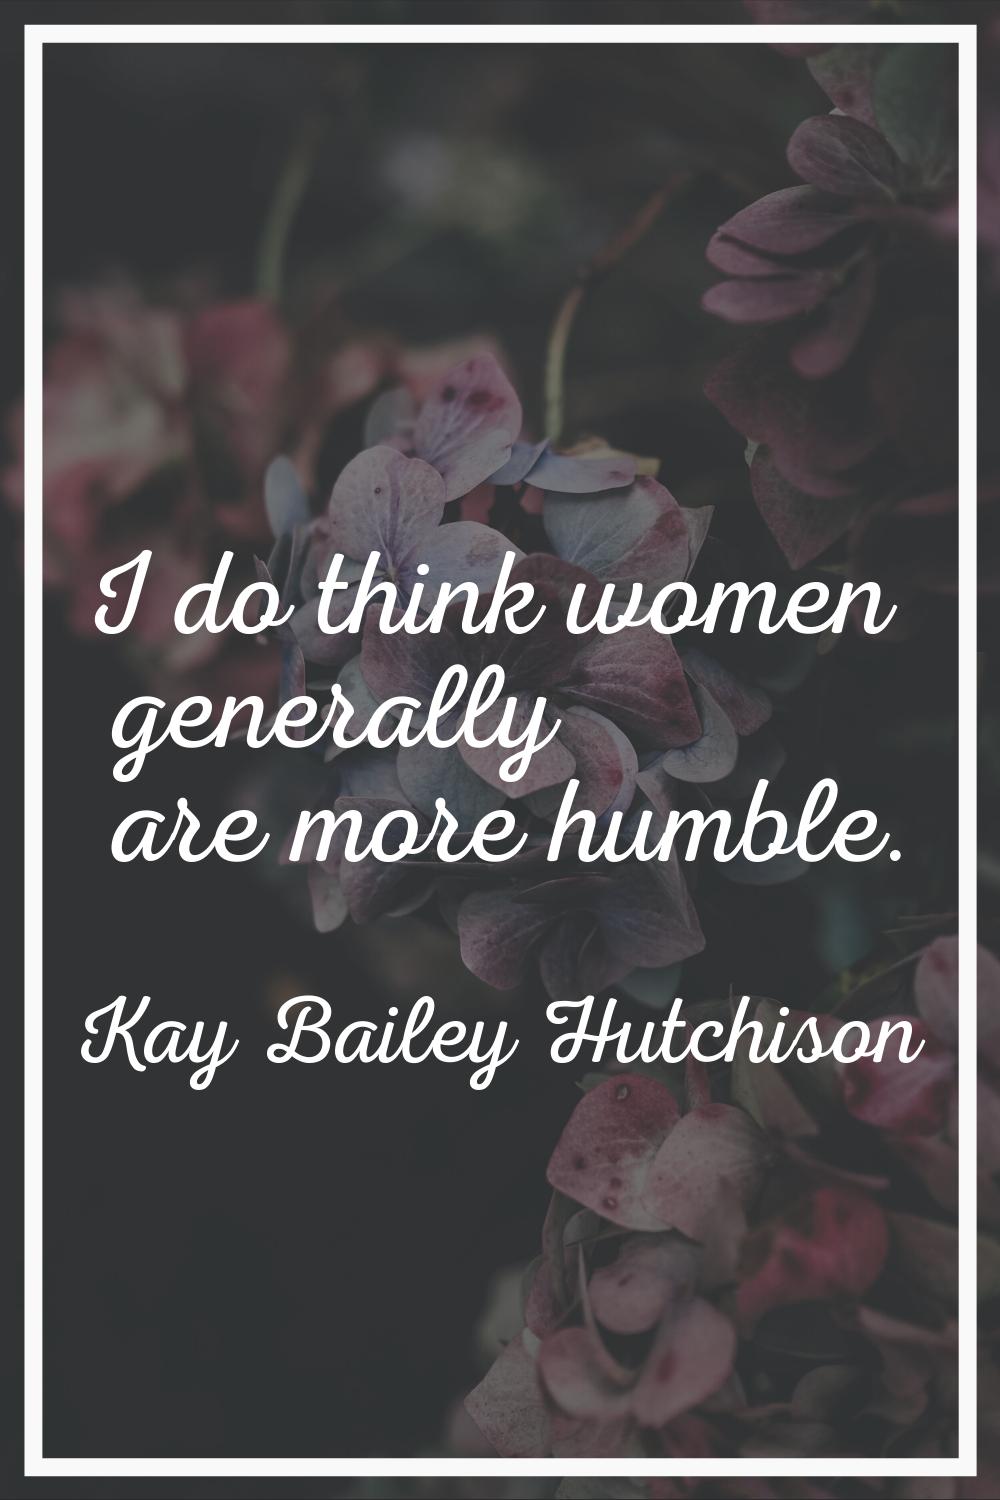 I do think women generally are more humble.